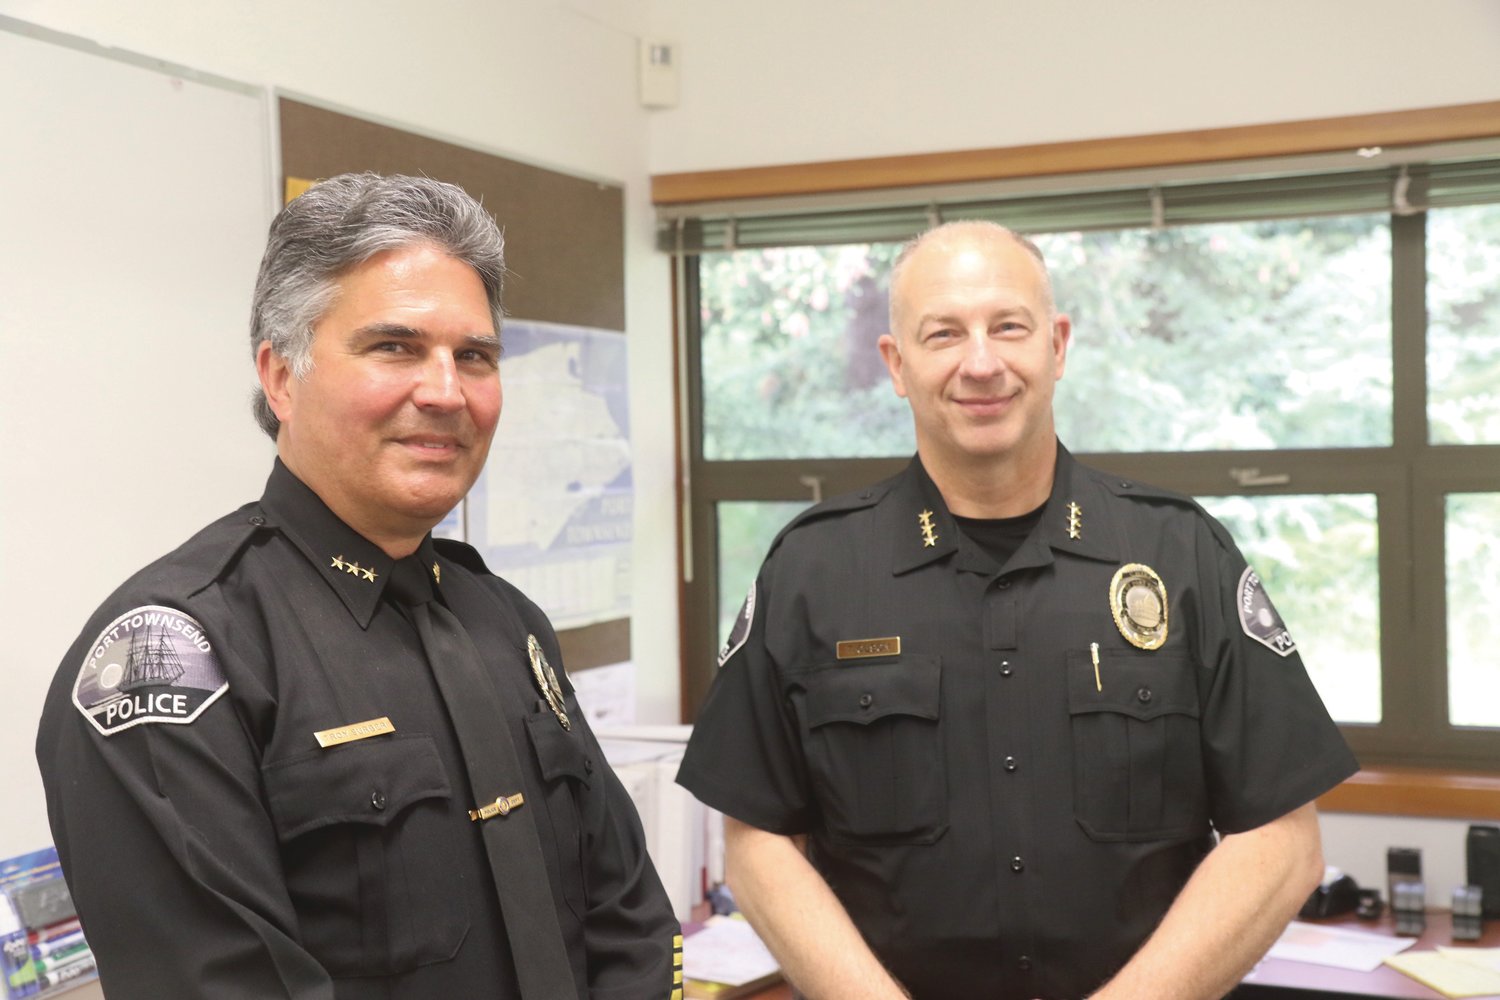 Outgoing Police Chief Troy Surber poses for a photo beside incoming Police Chief Thomas Olson on Surber’s last day with the department.